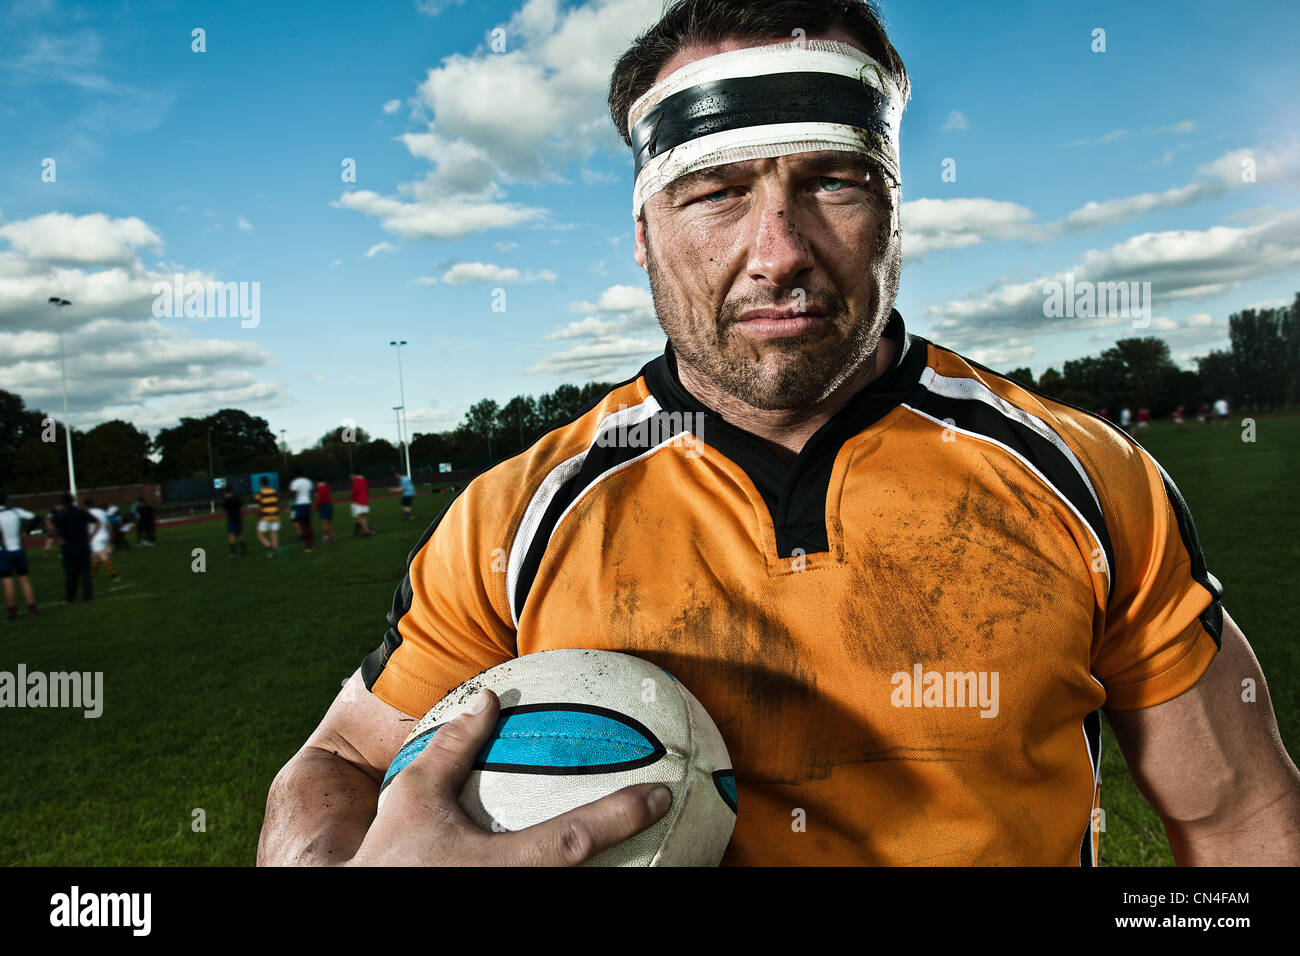 Rugby player holding ball le pitch, portrait Banque D'Images